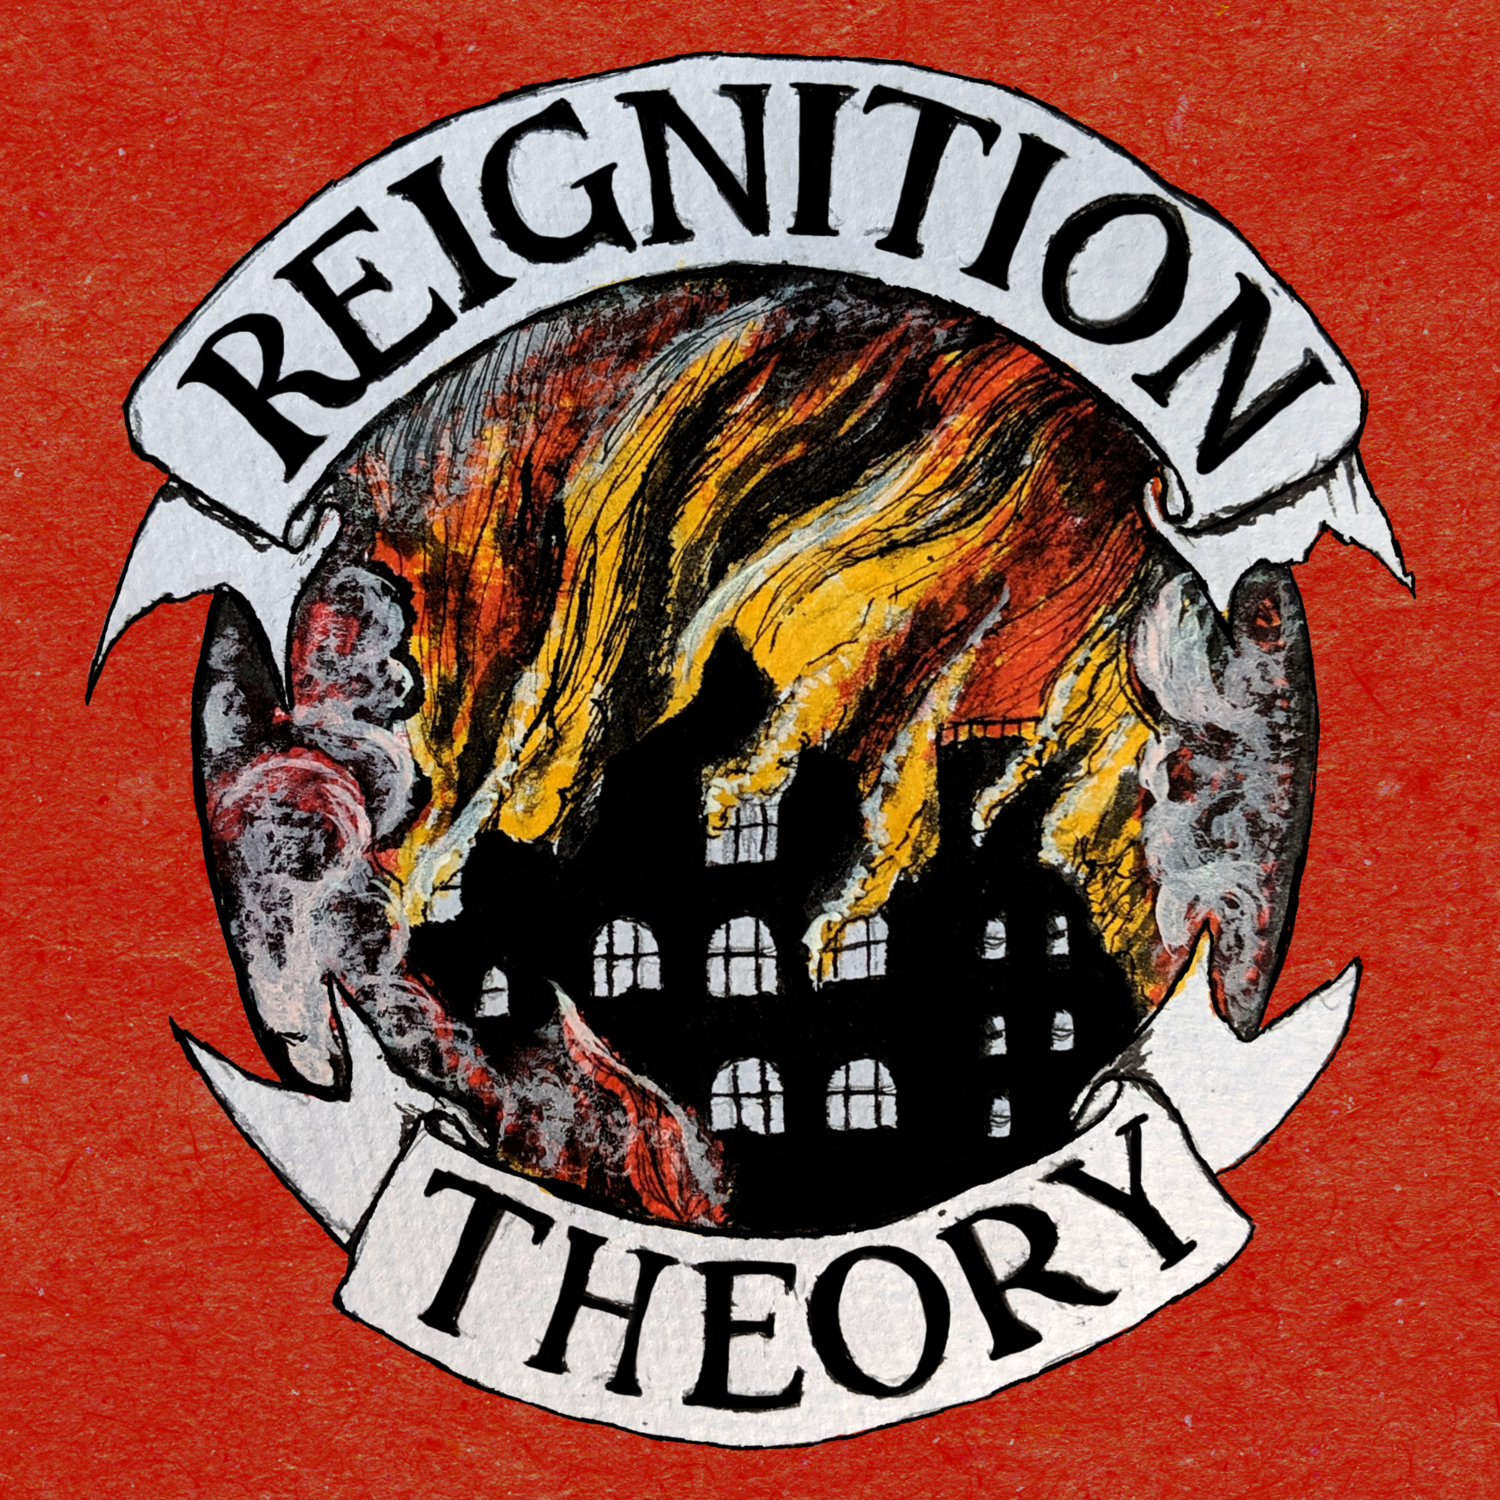 Episode 3 - Brotherhood - The Reignition Theory